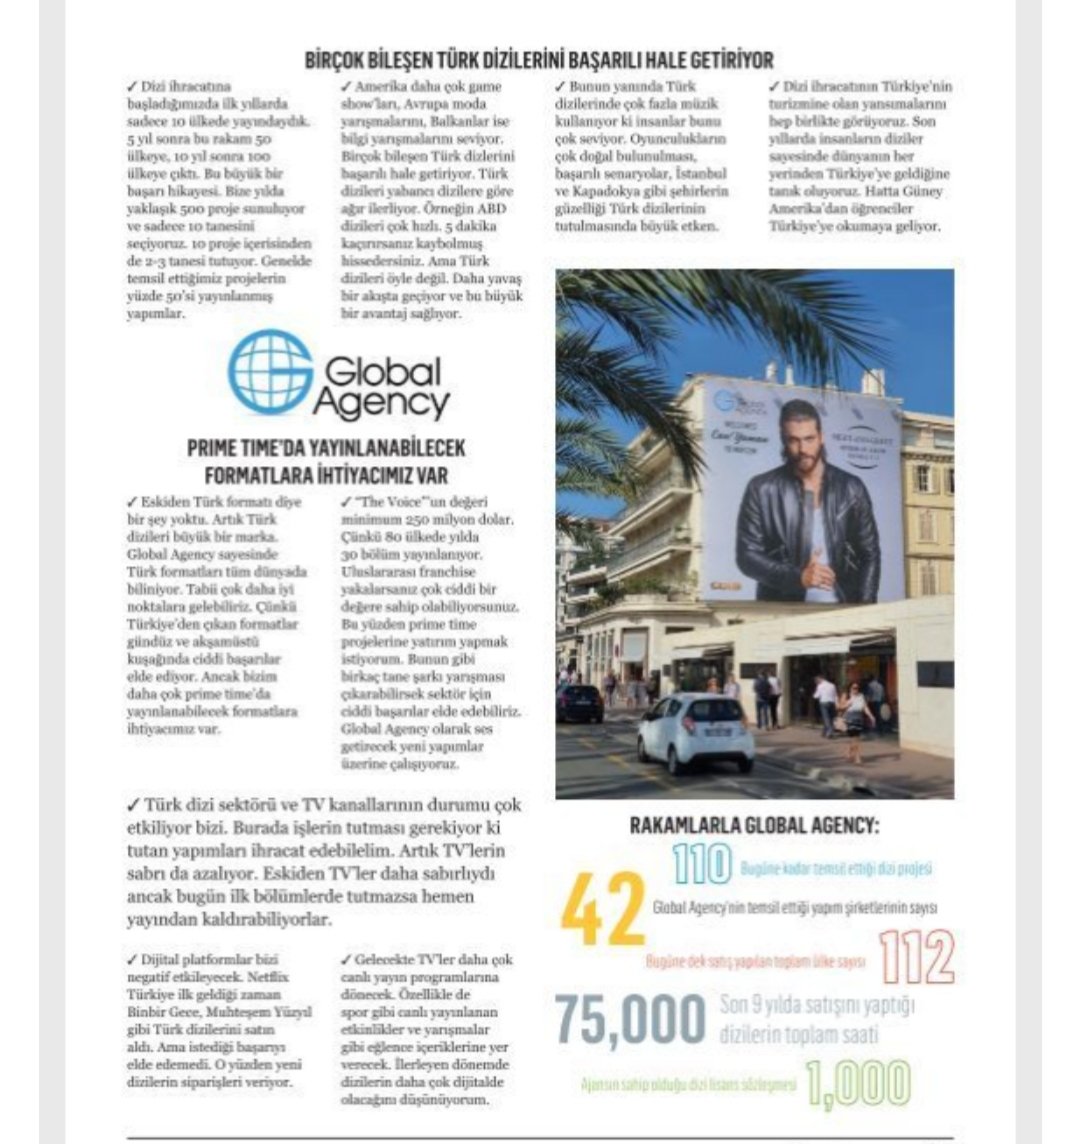 Nice memories from the last #MIPCOM in new interview of #GlobalAgency founder #IzzetPinto! 
Keep positive mood during difficult time at home with #TurkishSeries such as #Daydreamer (#ErkenciKus) and @canyaman1989 😎
#MiddleEast #Africa #Israel